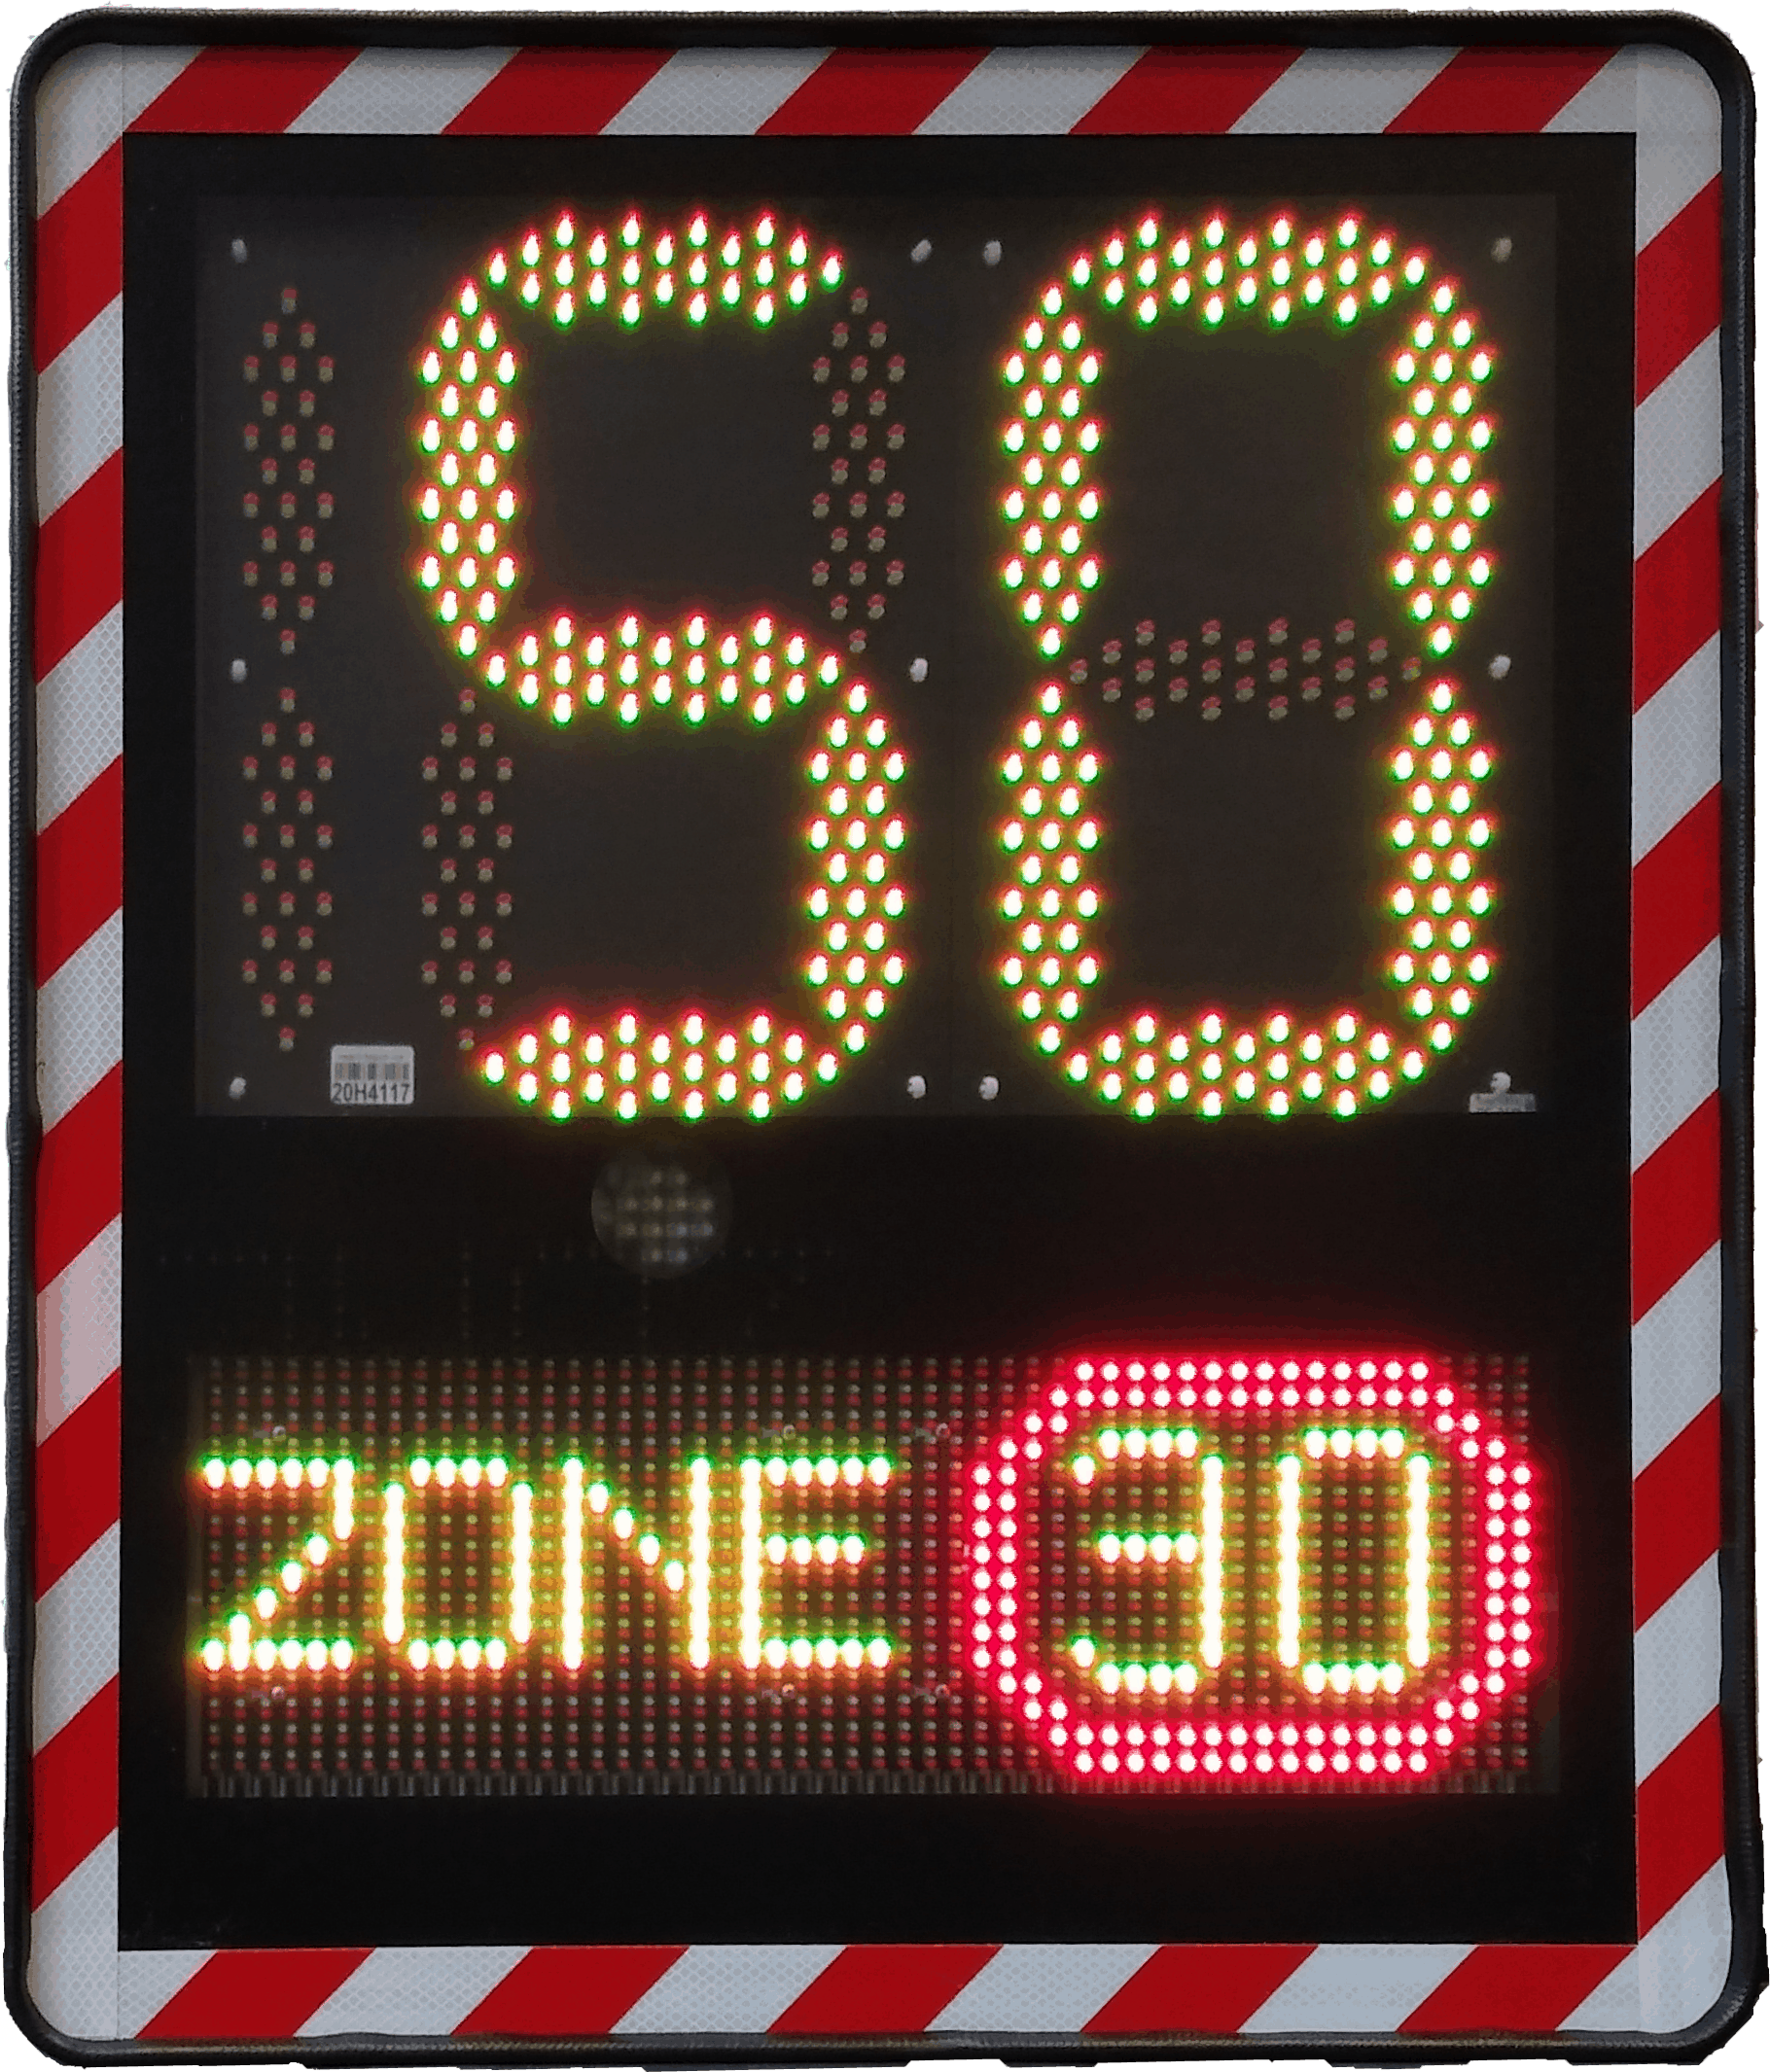 More color options for the I-SAFE 2 speed sign display